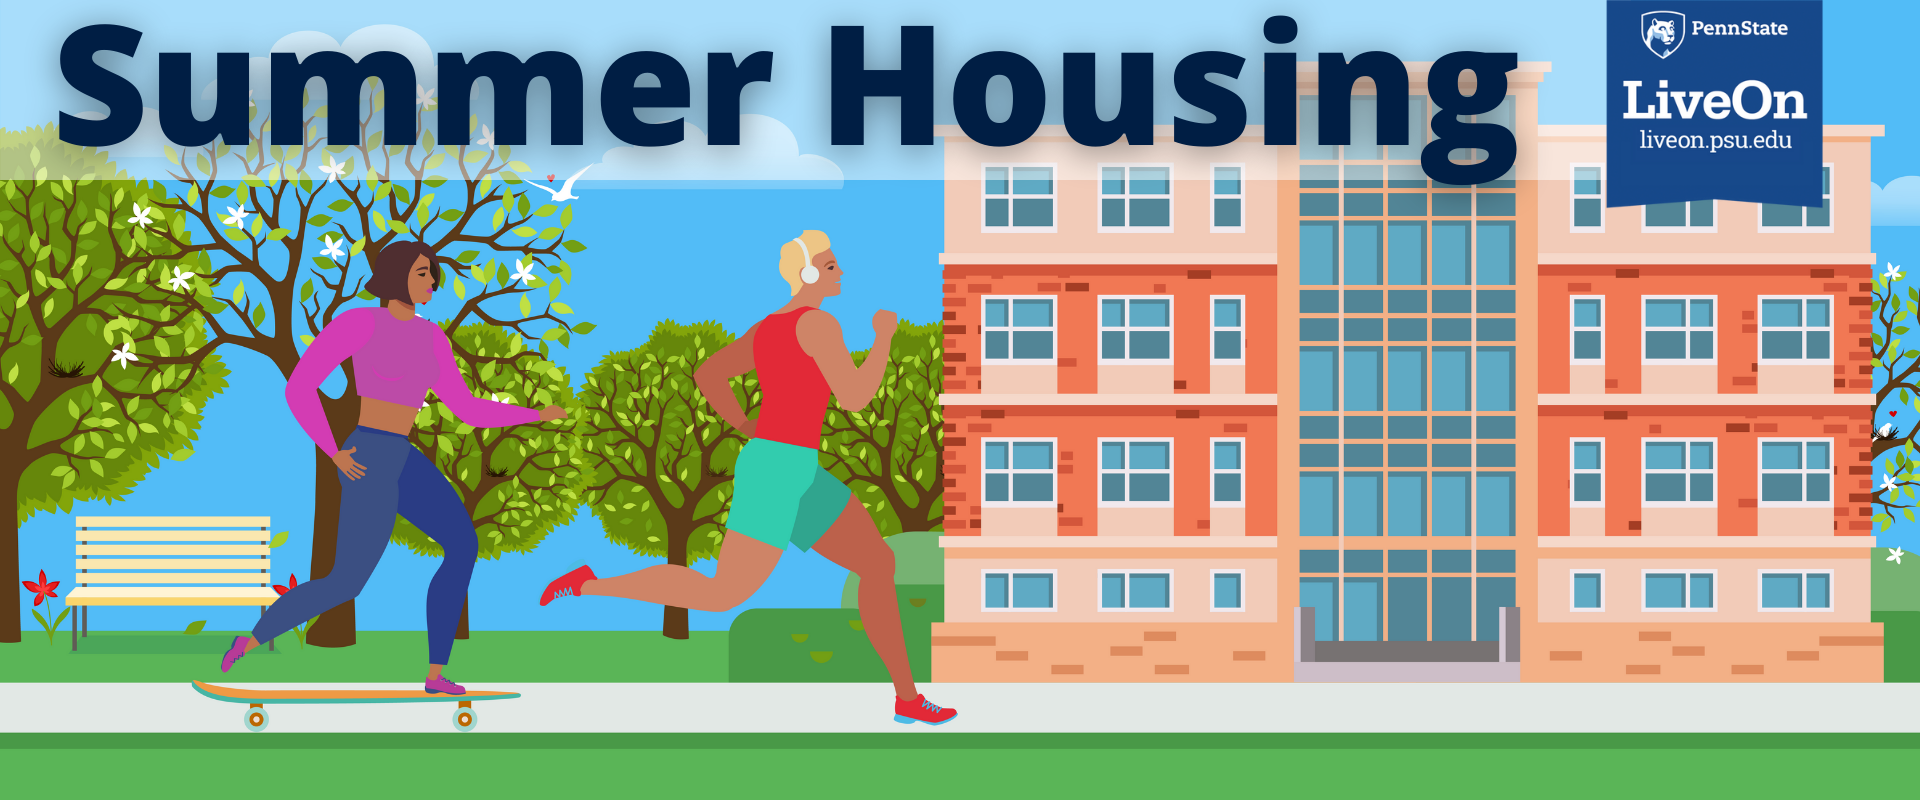 drawing of residence hall with students running and text overlay "Summer Housing"